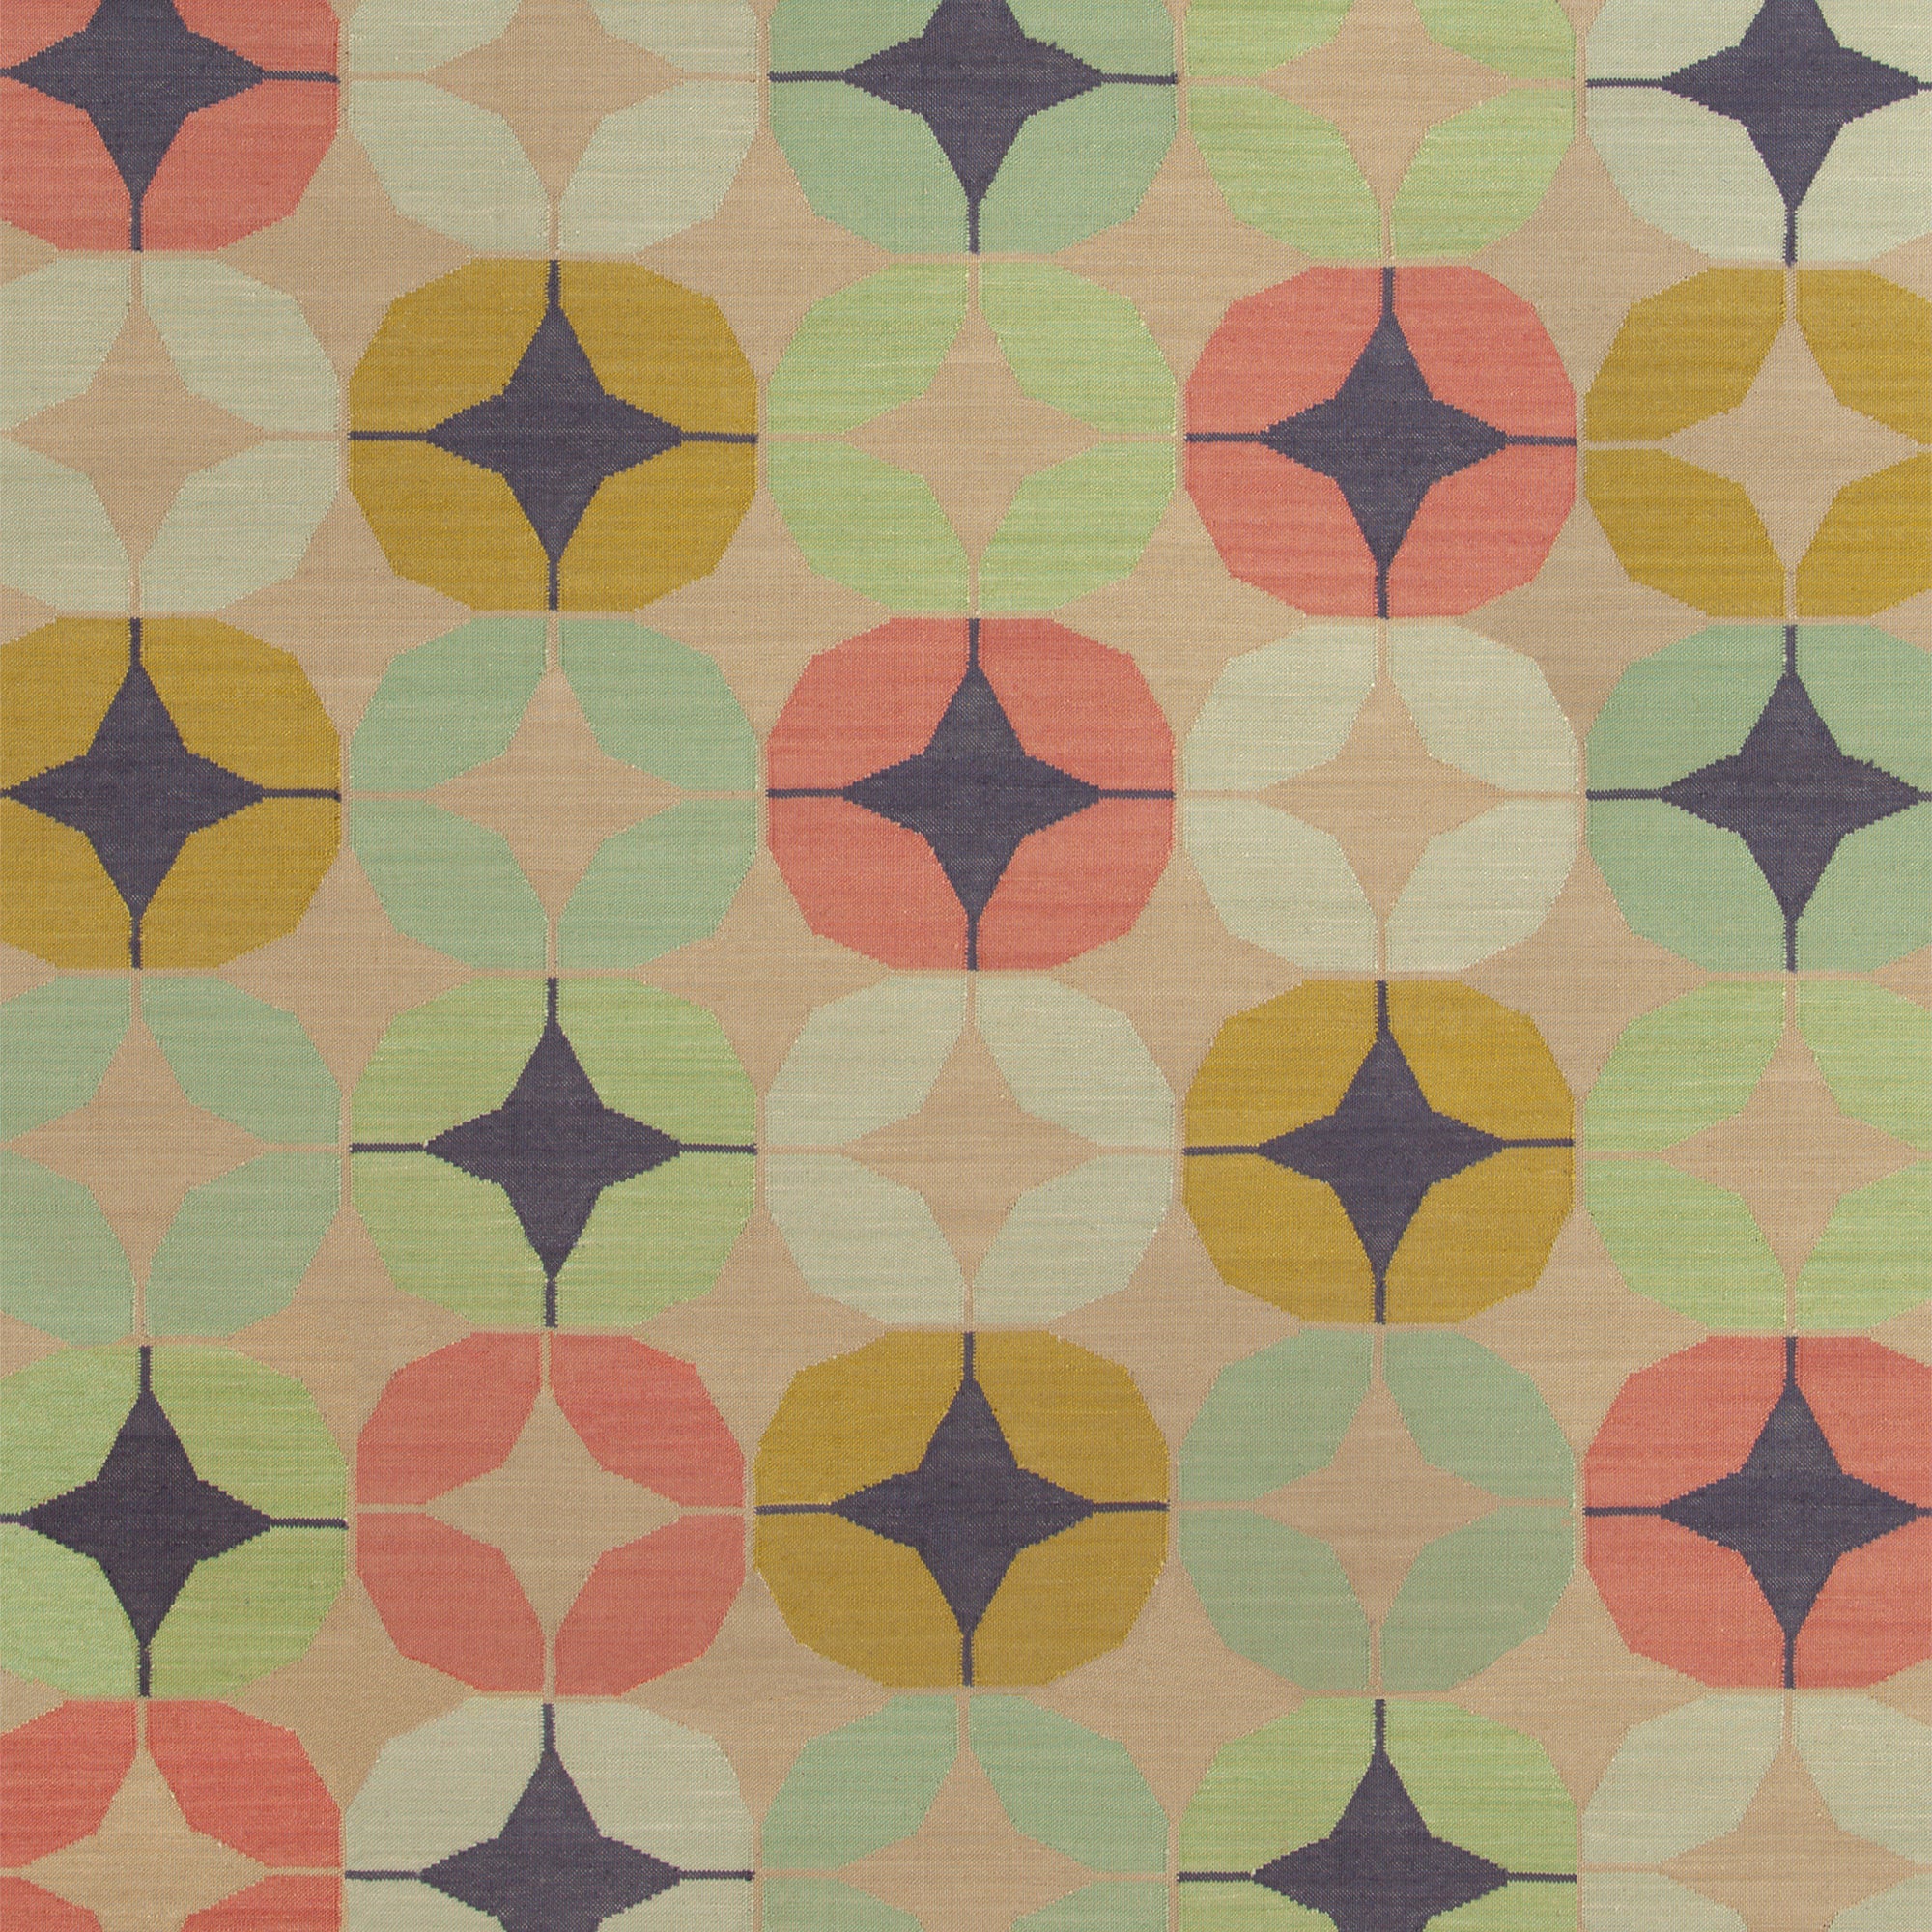 Rug swatch featuring a circle and star lattice pattern in coral, mustard yellow, seafoam green, pale green and royal purple accents on a tan field. 